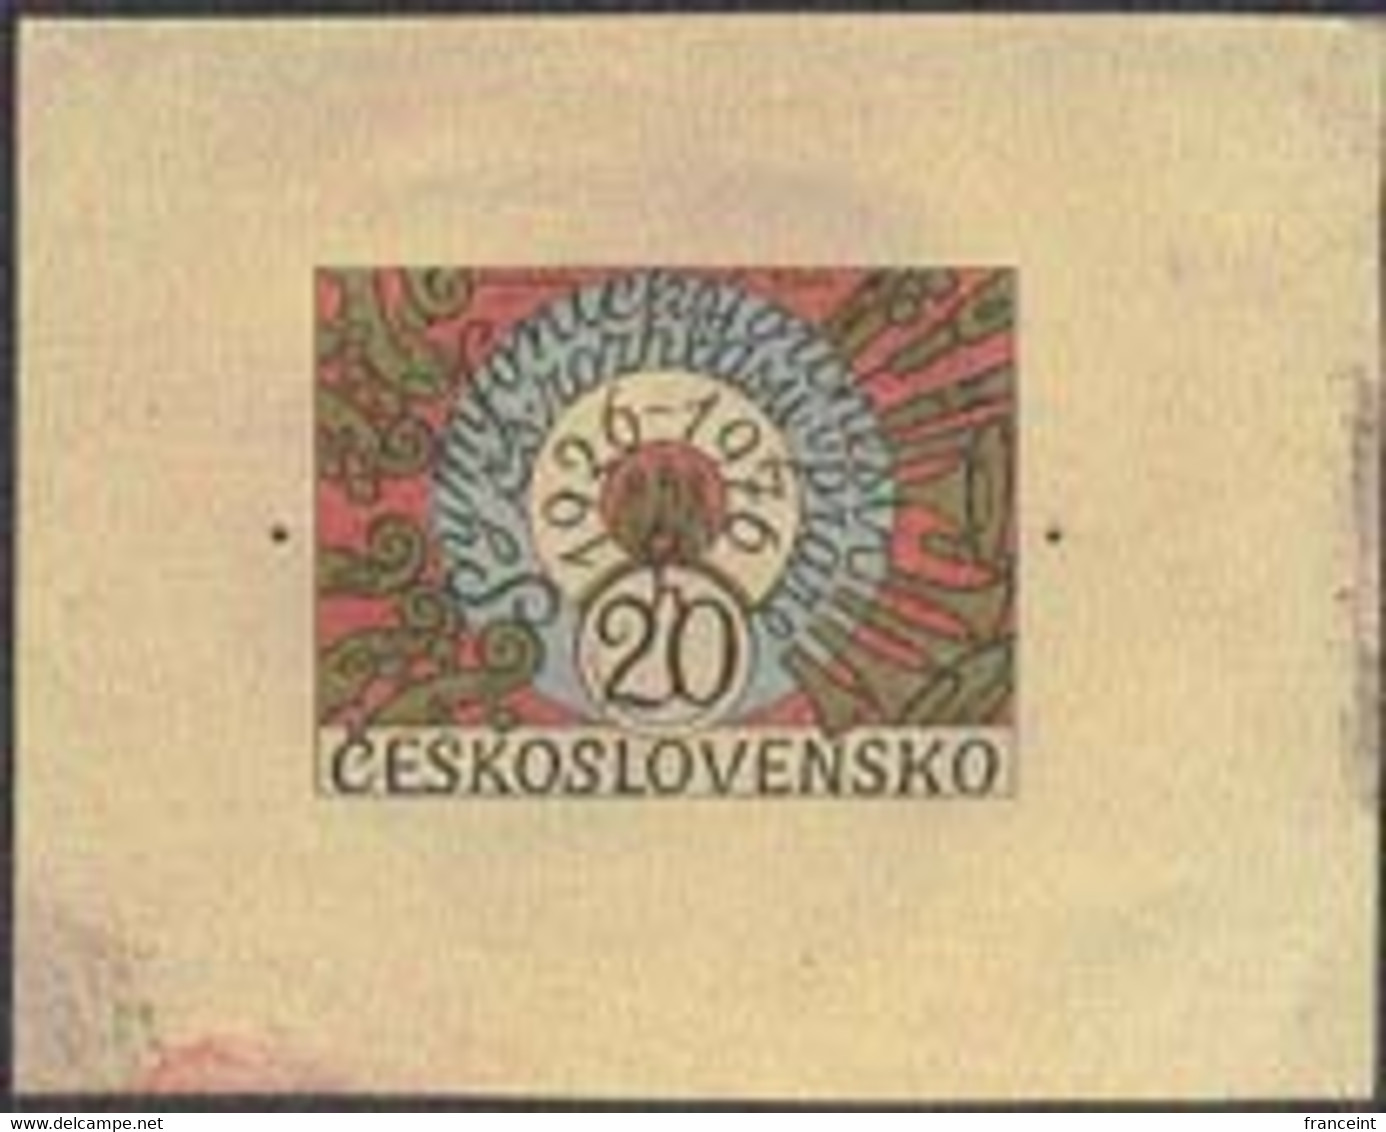 CZECHOSLOVAKIA (1976) Orchestral Instruments. Die Proof In Color. 50th Anniversary Of Radio Prague Orch. Scott No 2063 - Ensayos & Reimpresiones